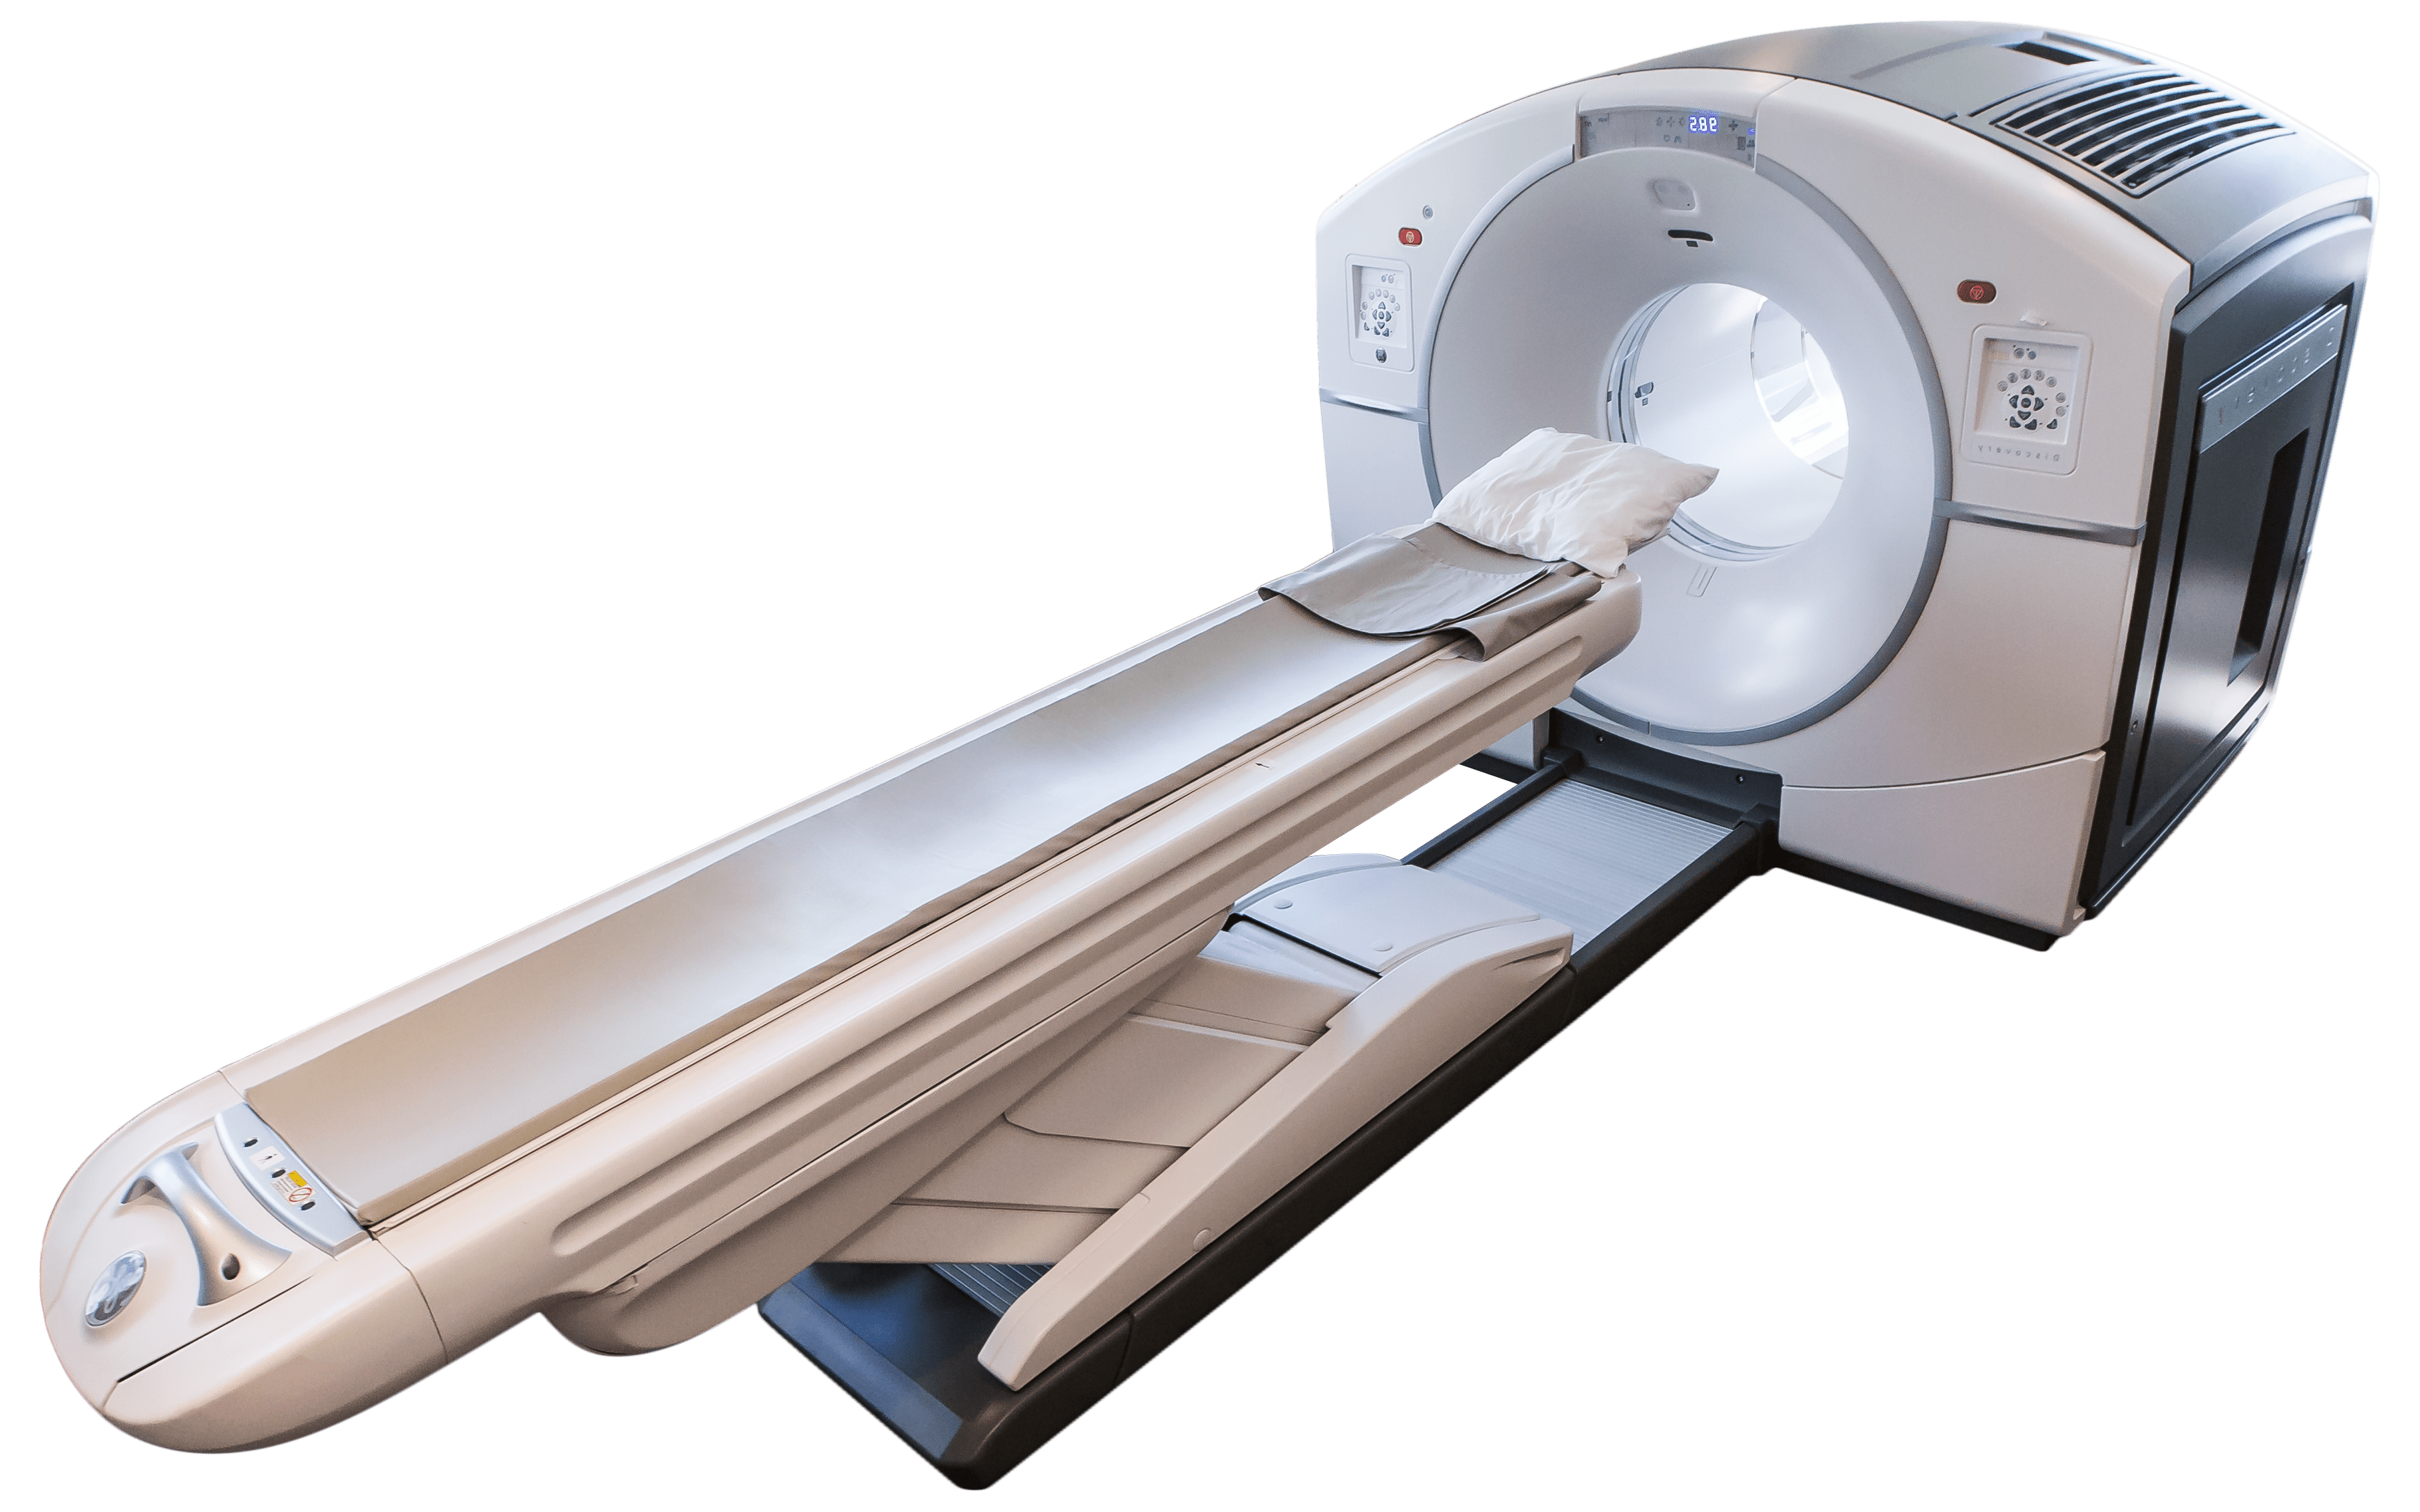 New GE Discovery IQ PET Scanner or PET/CT Scanner